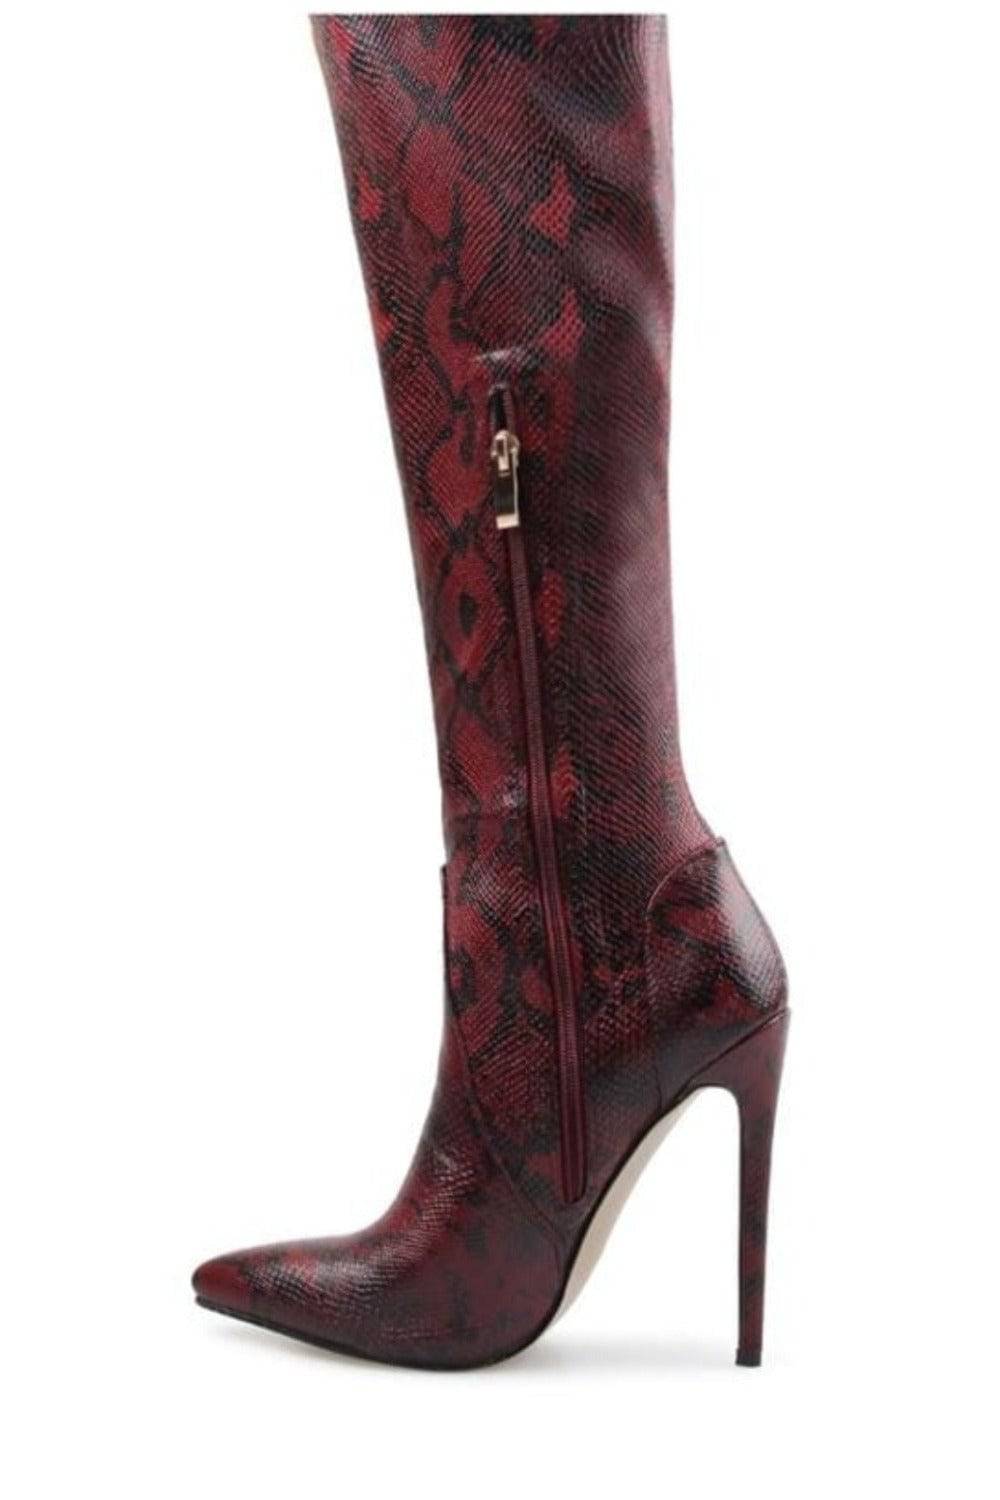 Snake Pattern Over The Knee High Heel Boot - TGC Boutique - High Heel Boots